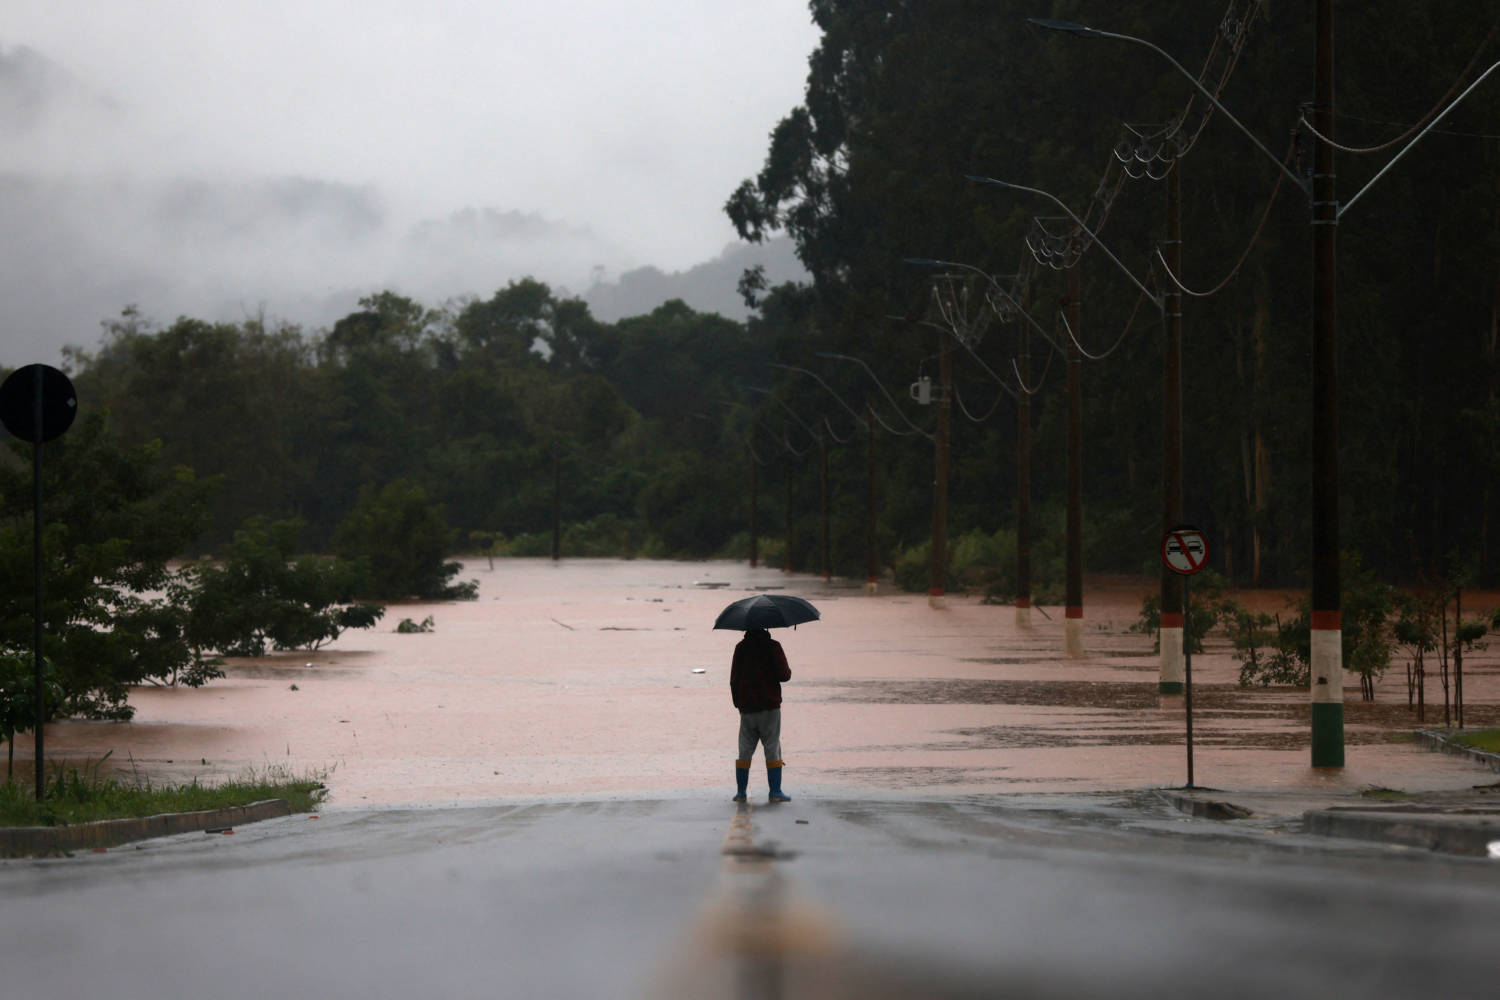 A Man Stands In Front Of Flooded Road Near The Taquari River During Heavy Rains In The City Of Encantado In Rio Grande Do Sul, Brazil